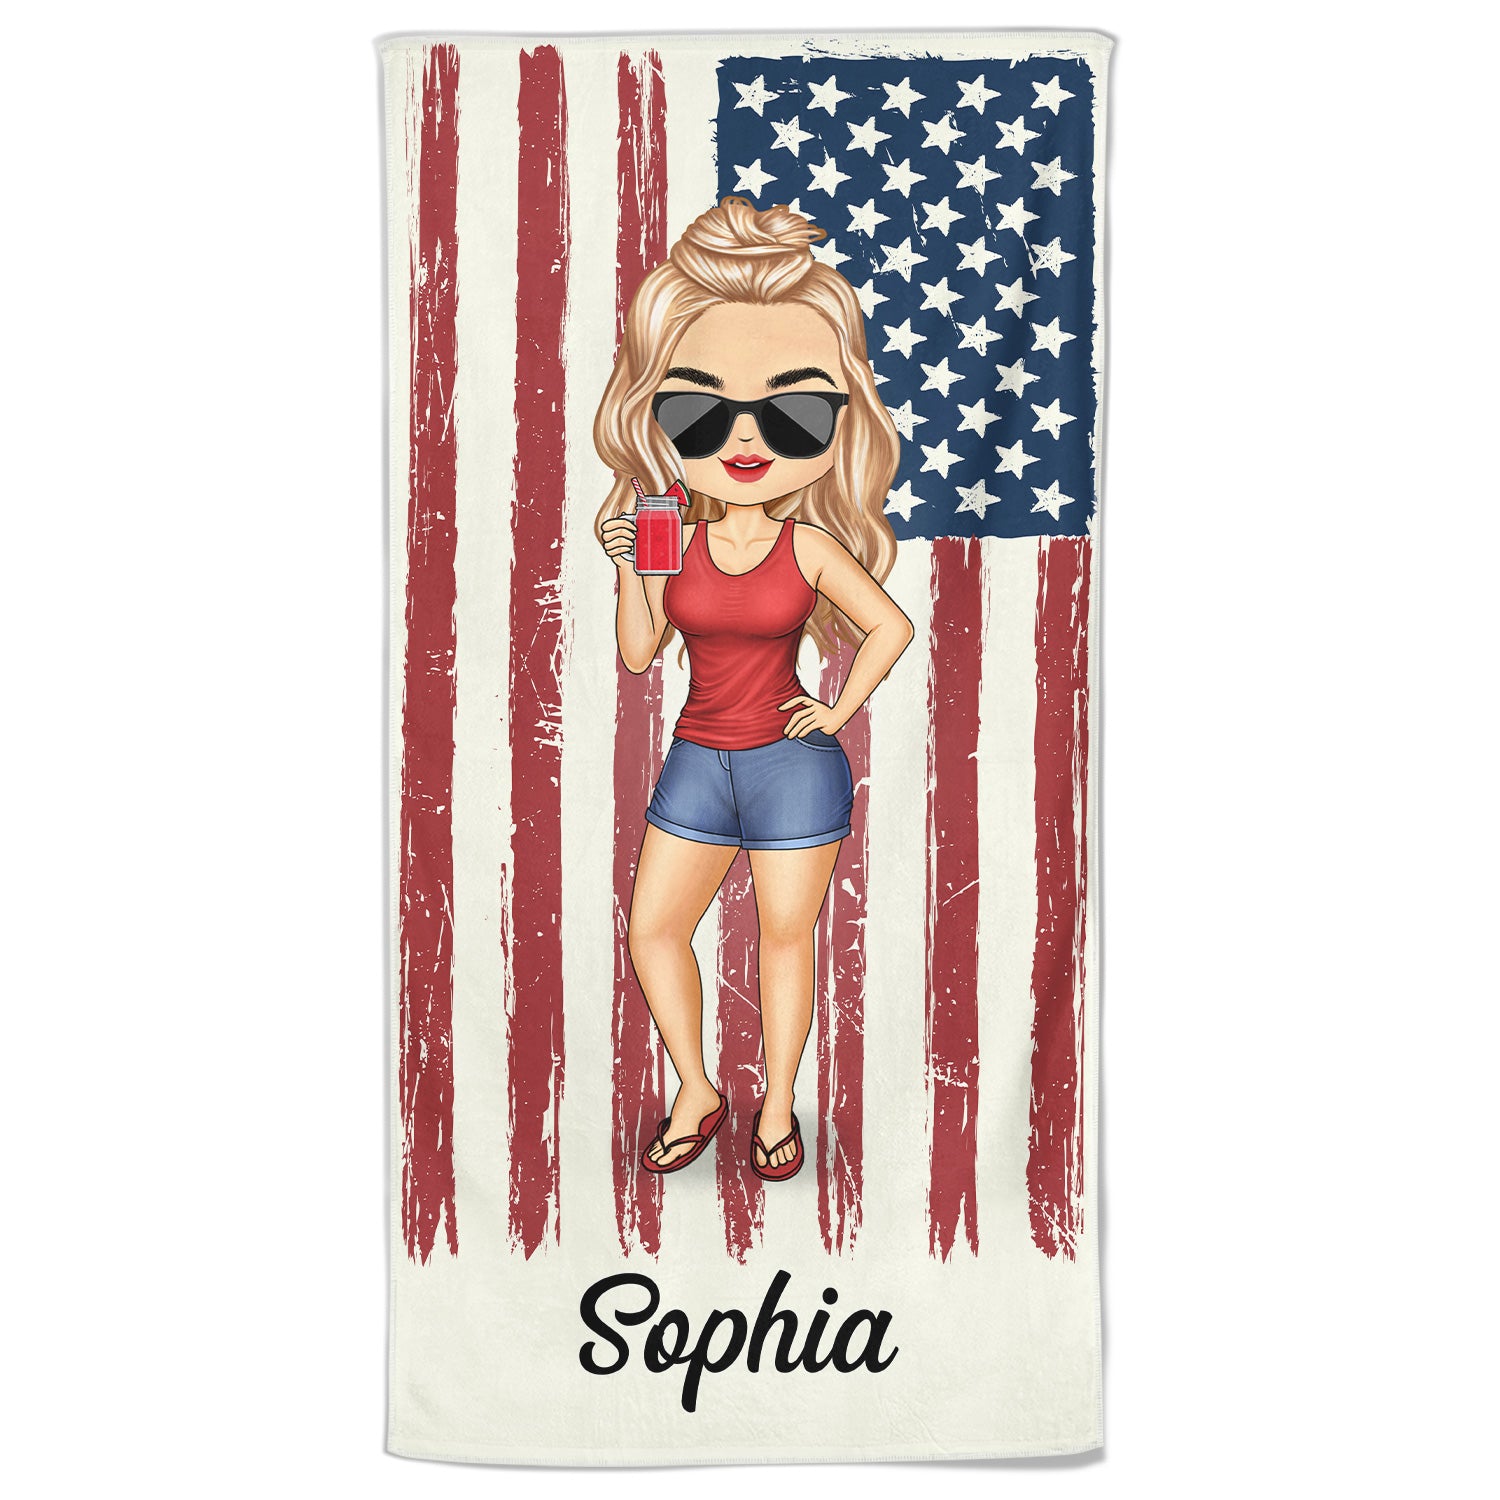 Chibi Traveling Beach Poolside Swimming Picnic Vacation Stars And Stripes - Birthday, Funny Gift For Her, Him, Besties, Family - Personalized Custom Beach Towel